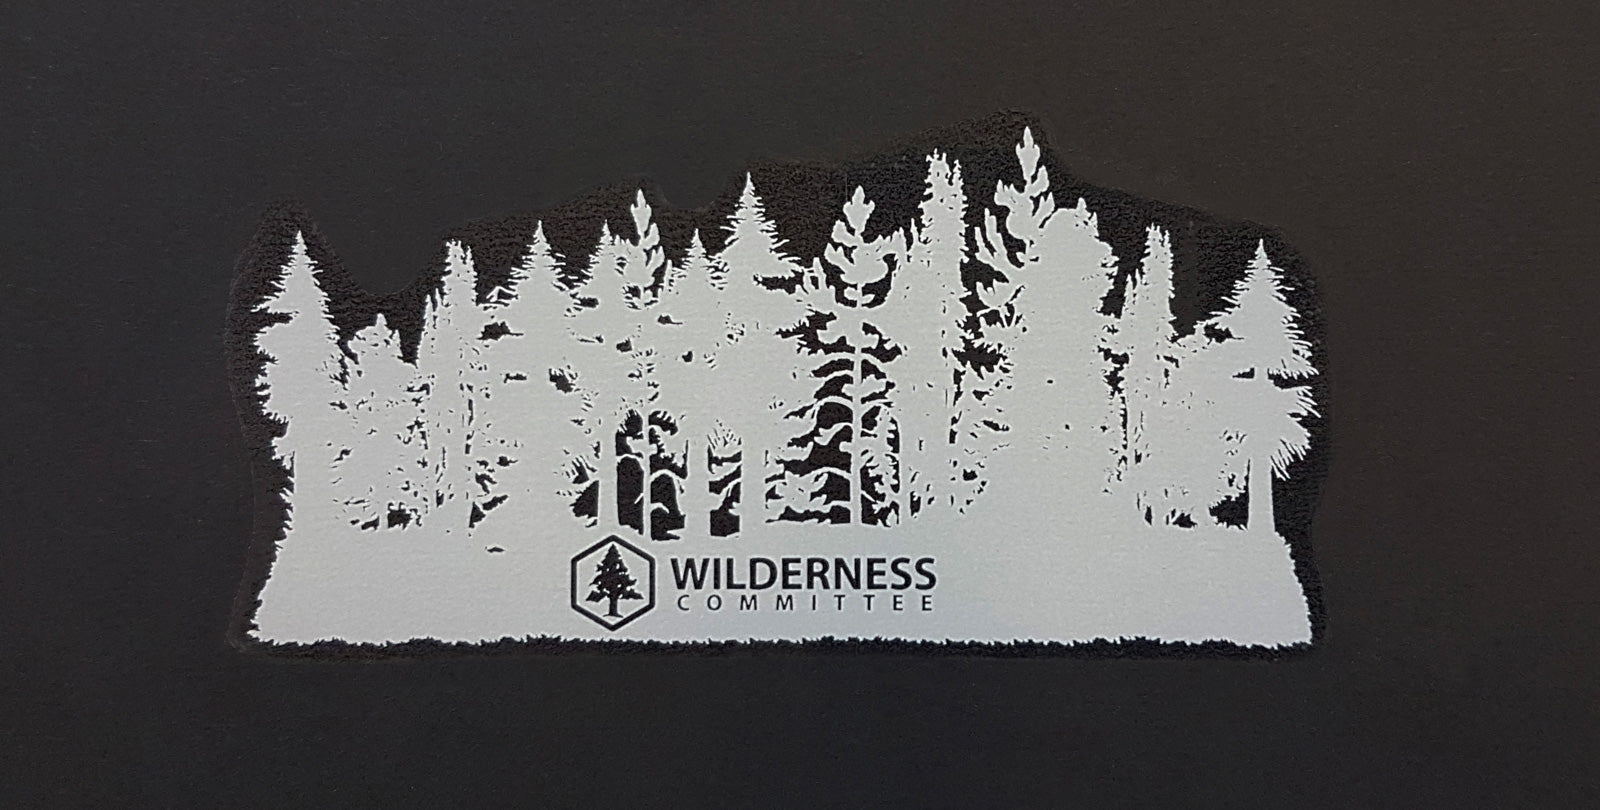 A decal of a forest filled with different trees, with the Wilderness Committee's logo at the bottom. End of image description.